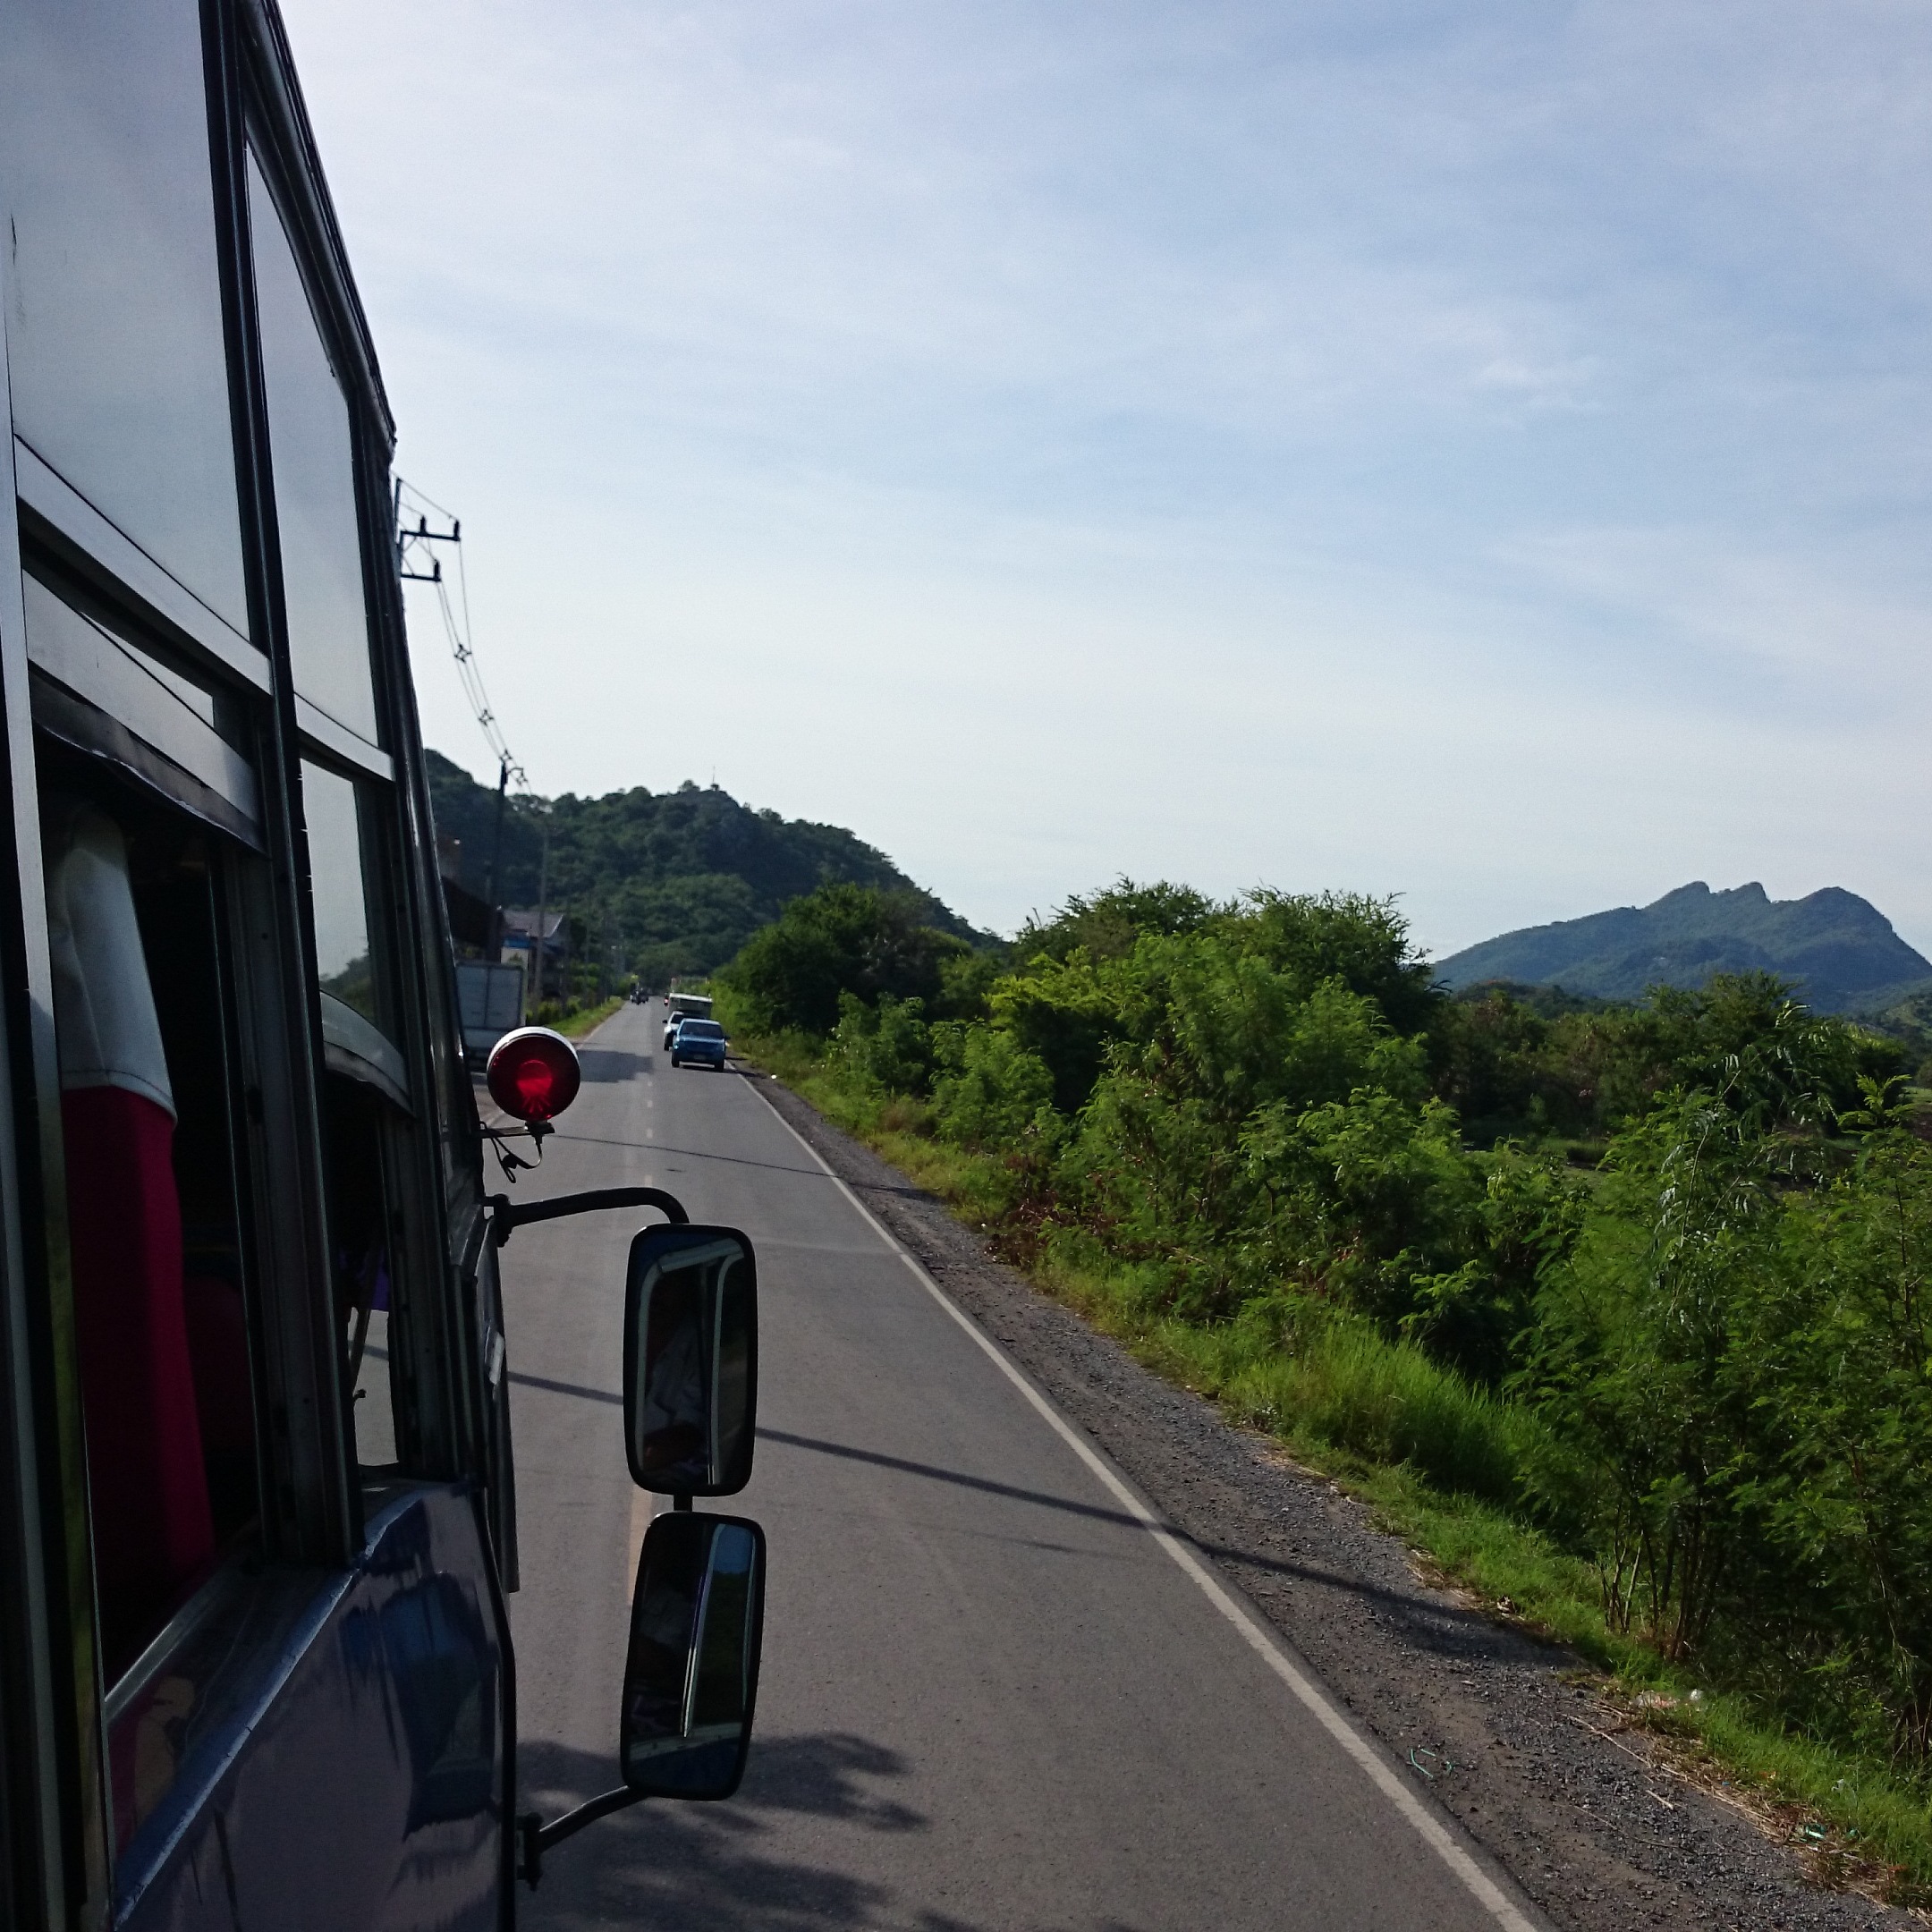 Cropped 376 thailand 2014 viewbusscenery